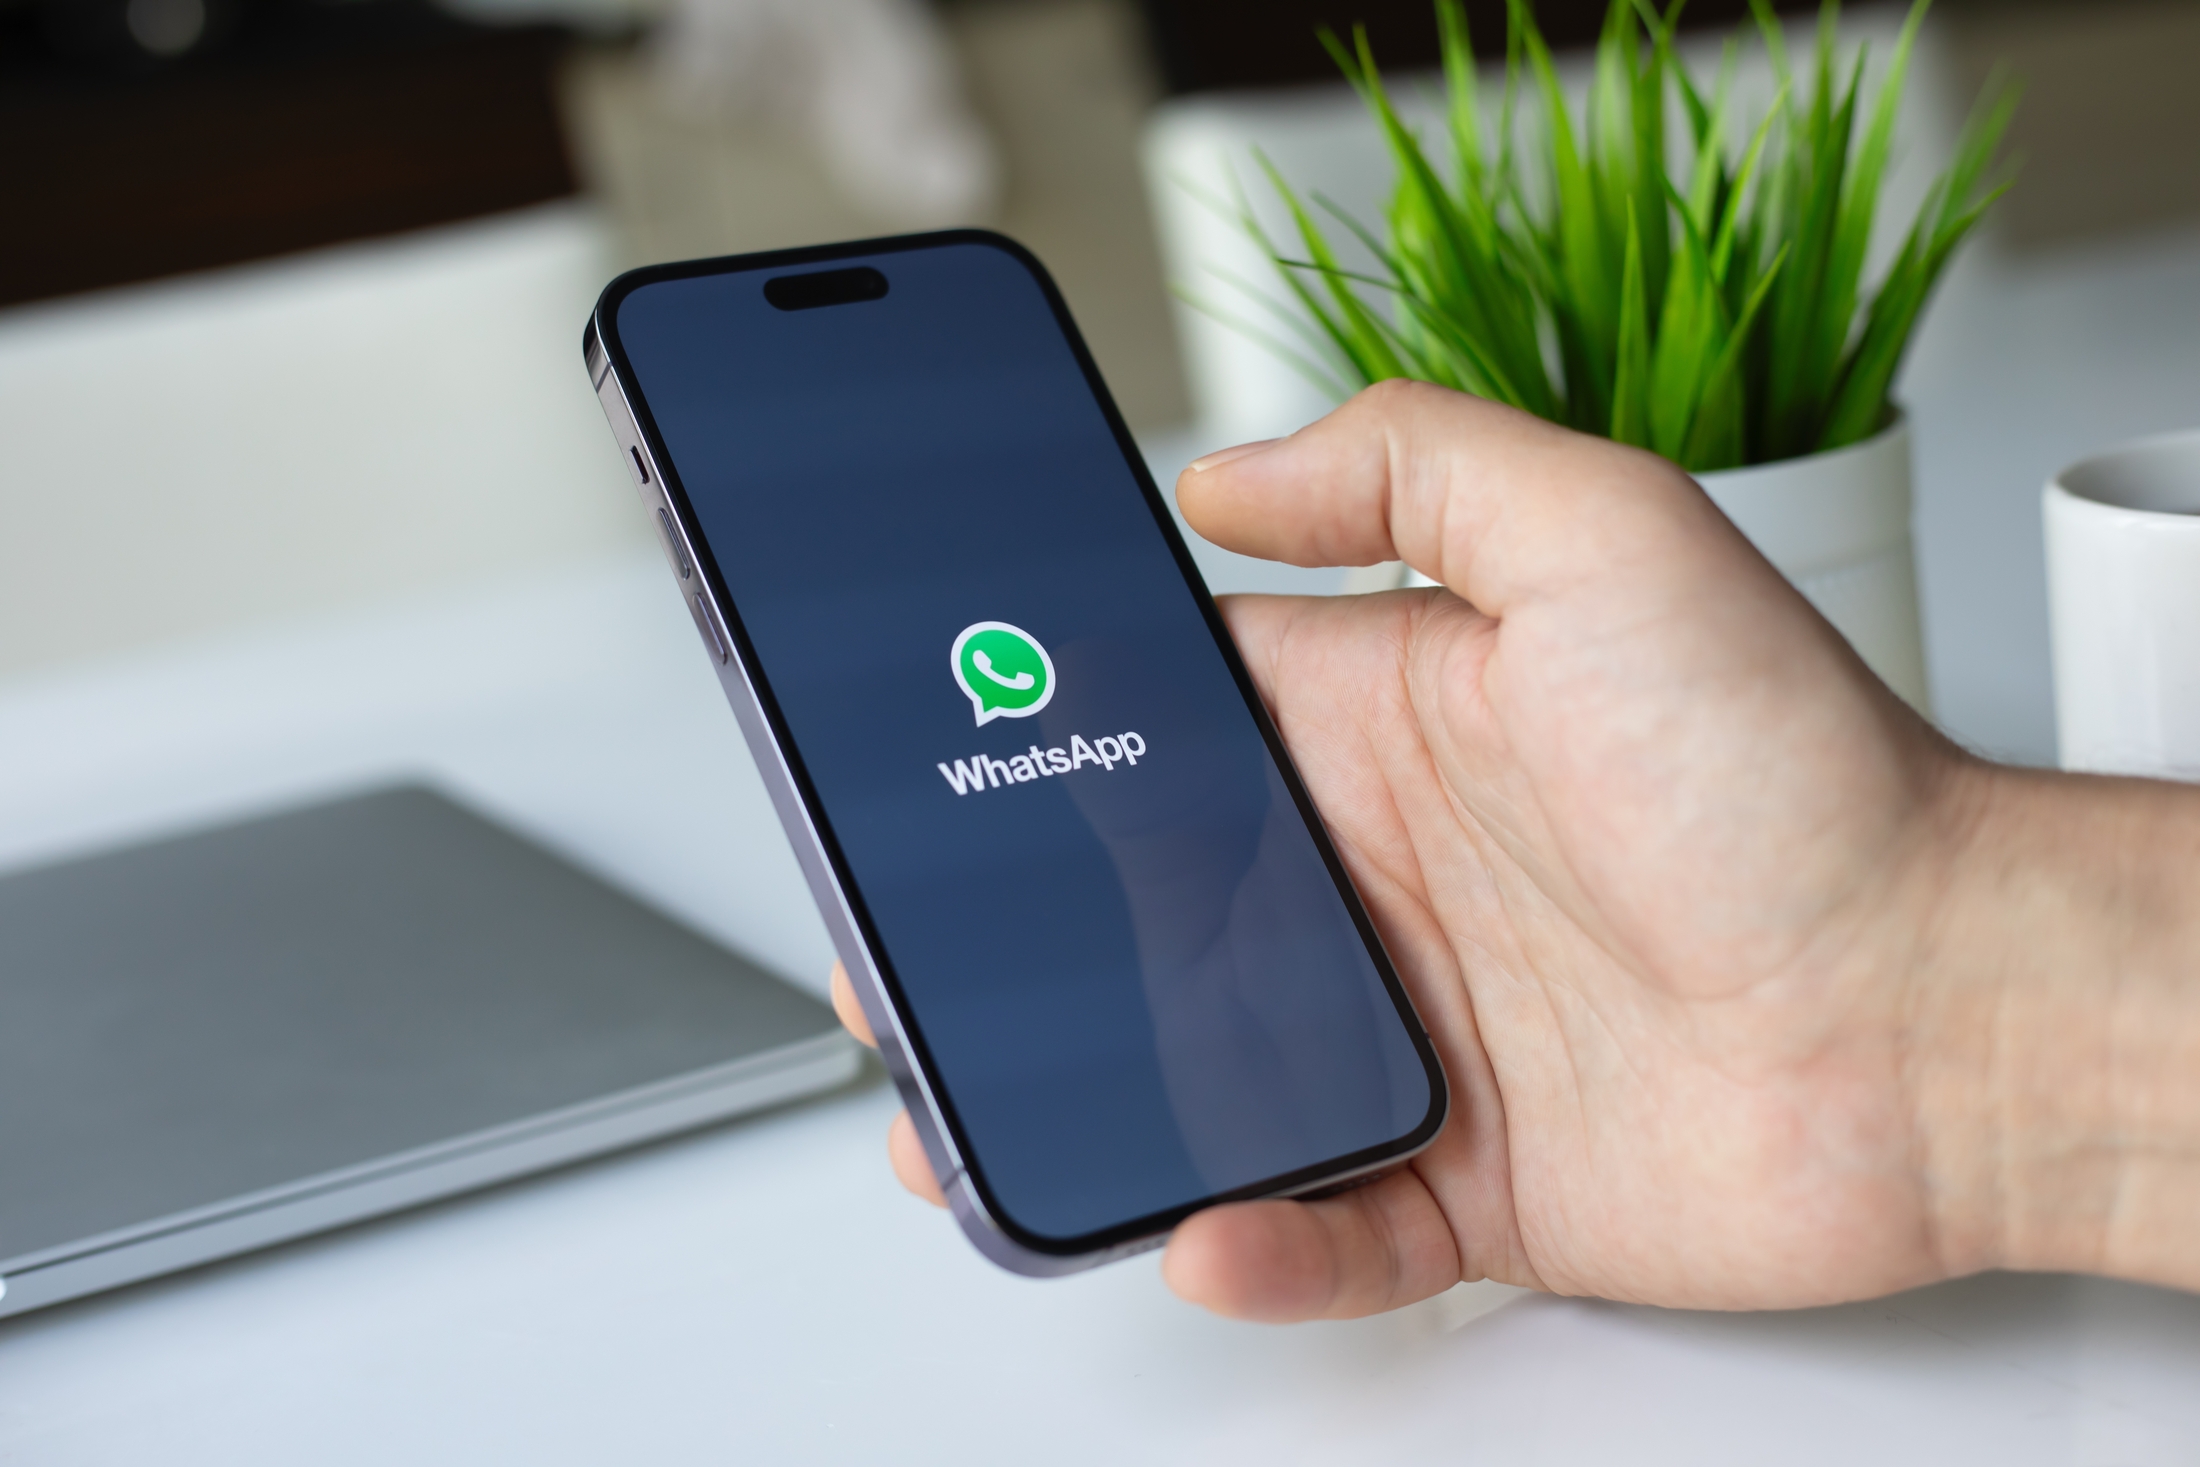 WhatsApp will stop working on some phones; see which ones